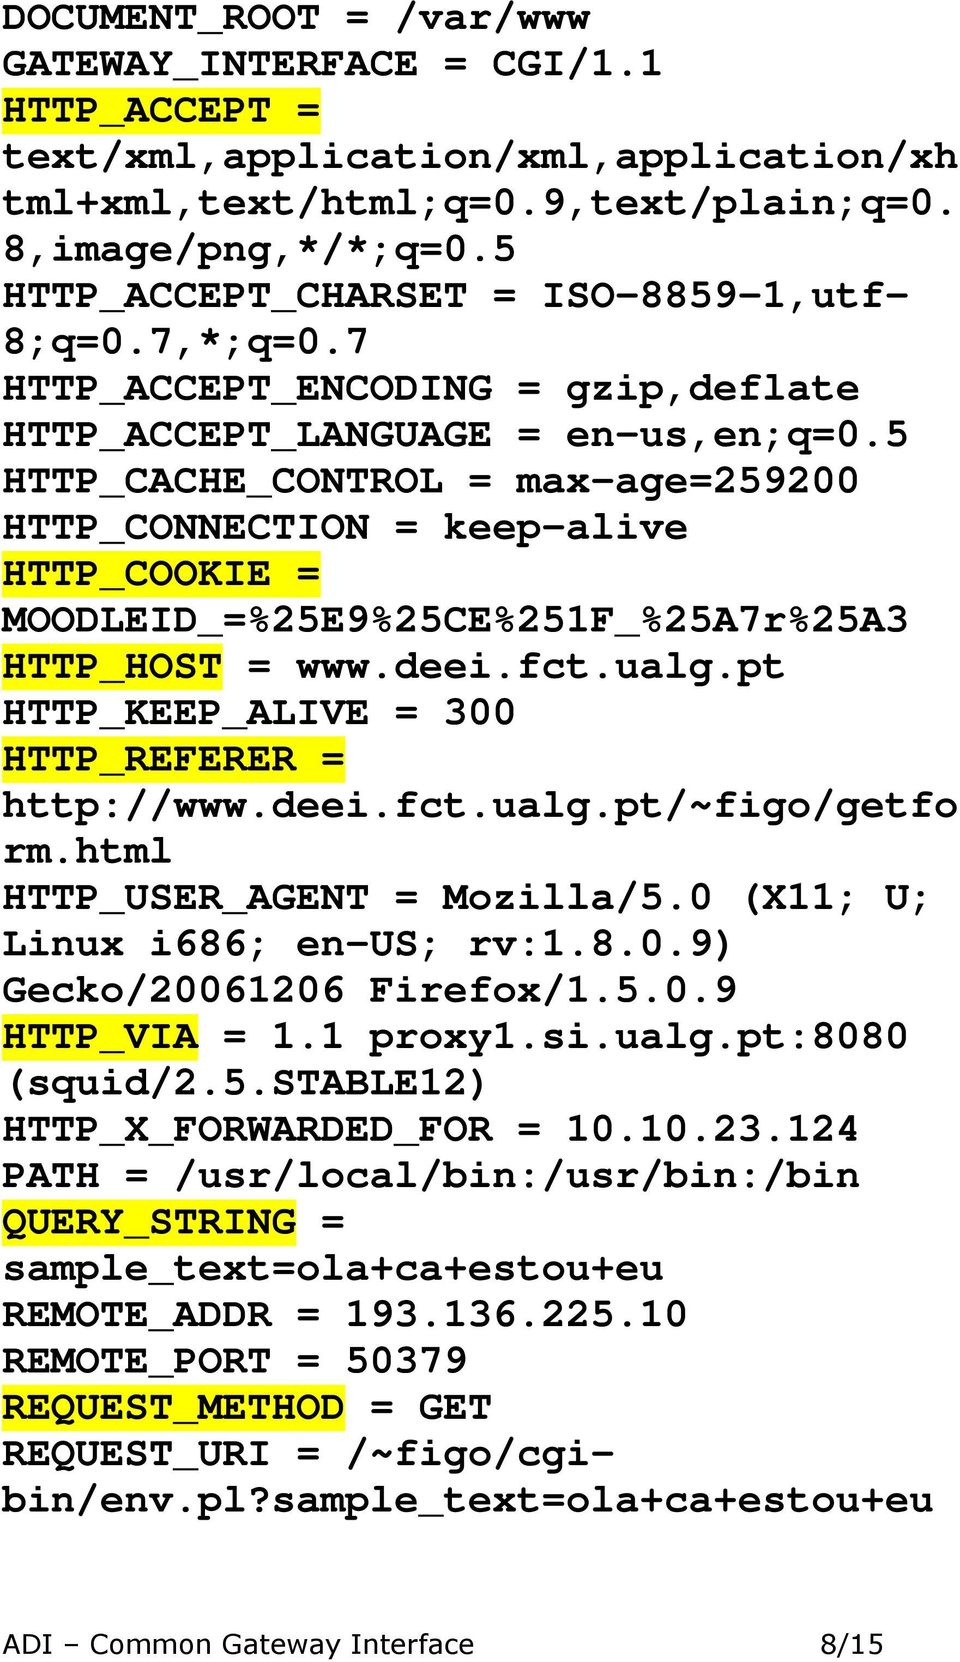 5 HTTP_CACHE_CONTROL = max-age=259200 HTTP_CONNECTION = keep-alive HTTP_COOKIE = MOODLEID_=%25E9%25CE%251F_%25A7r%25A3 HTTP_HOST = www.deei.fct.ualg.pt HTTP_KEEP_ALIVE = 300 HTTP_REFERER = http://www.